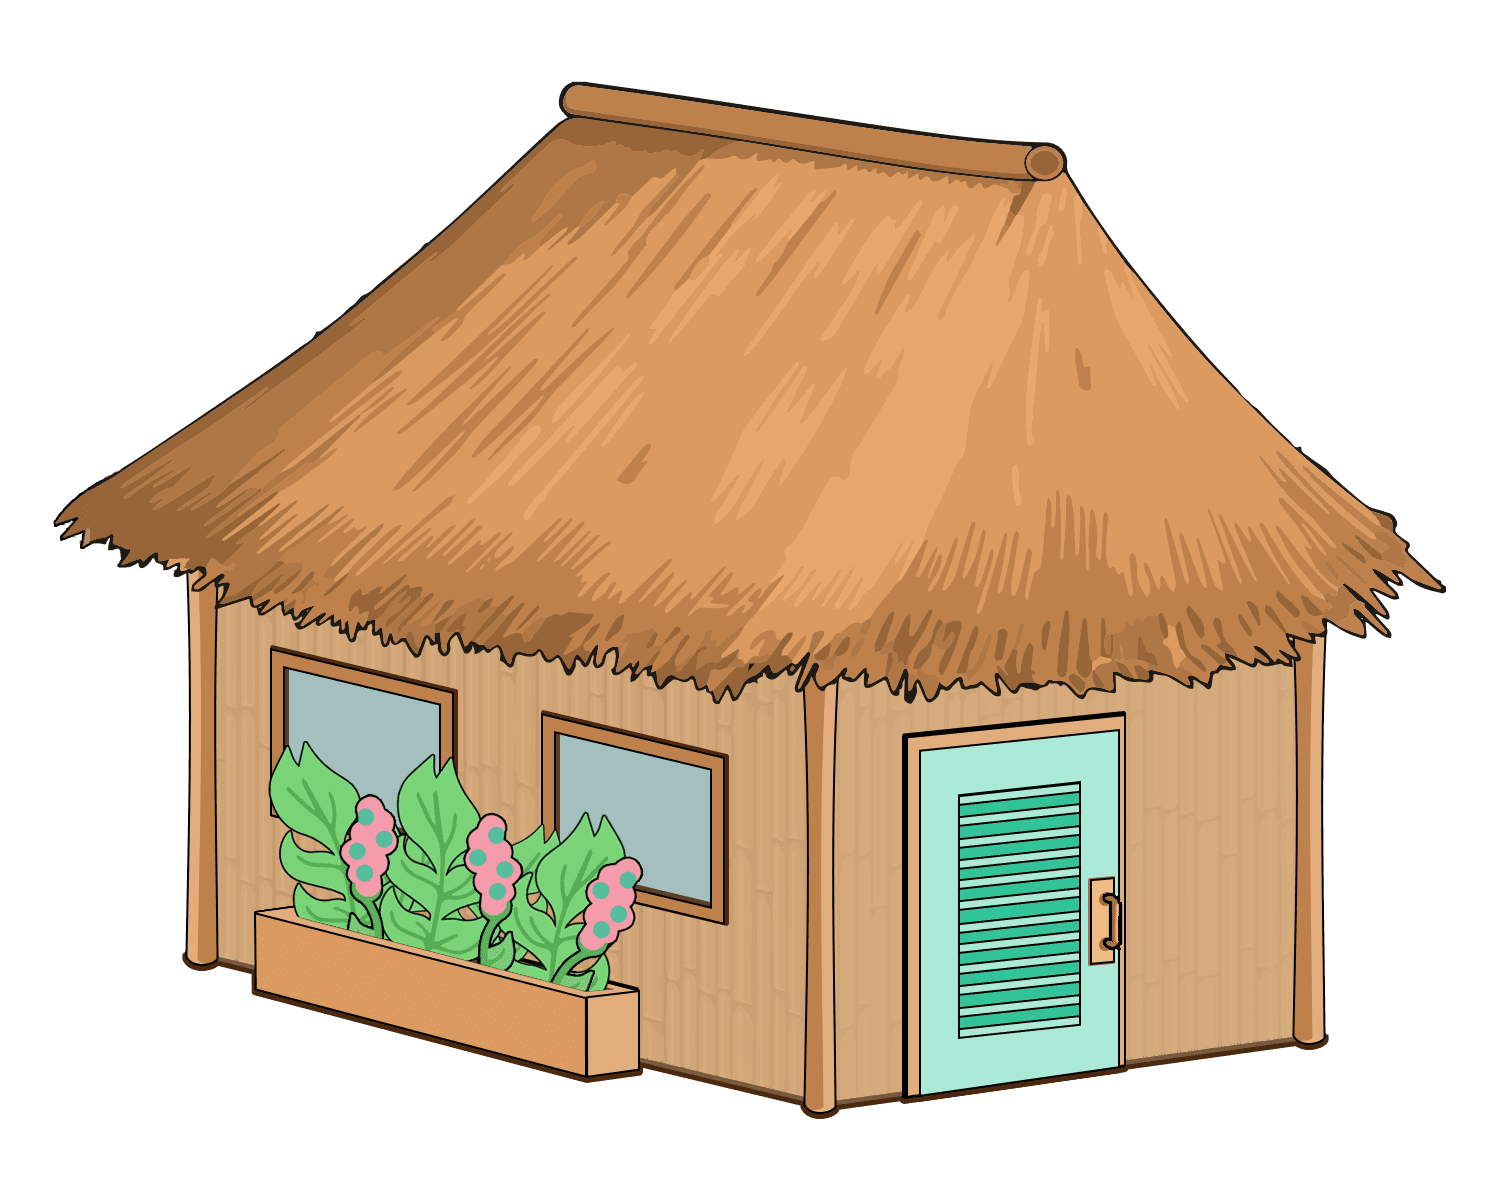 A tropical hut with a grass roof